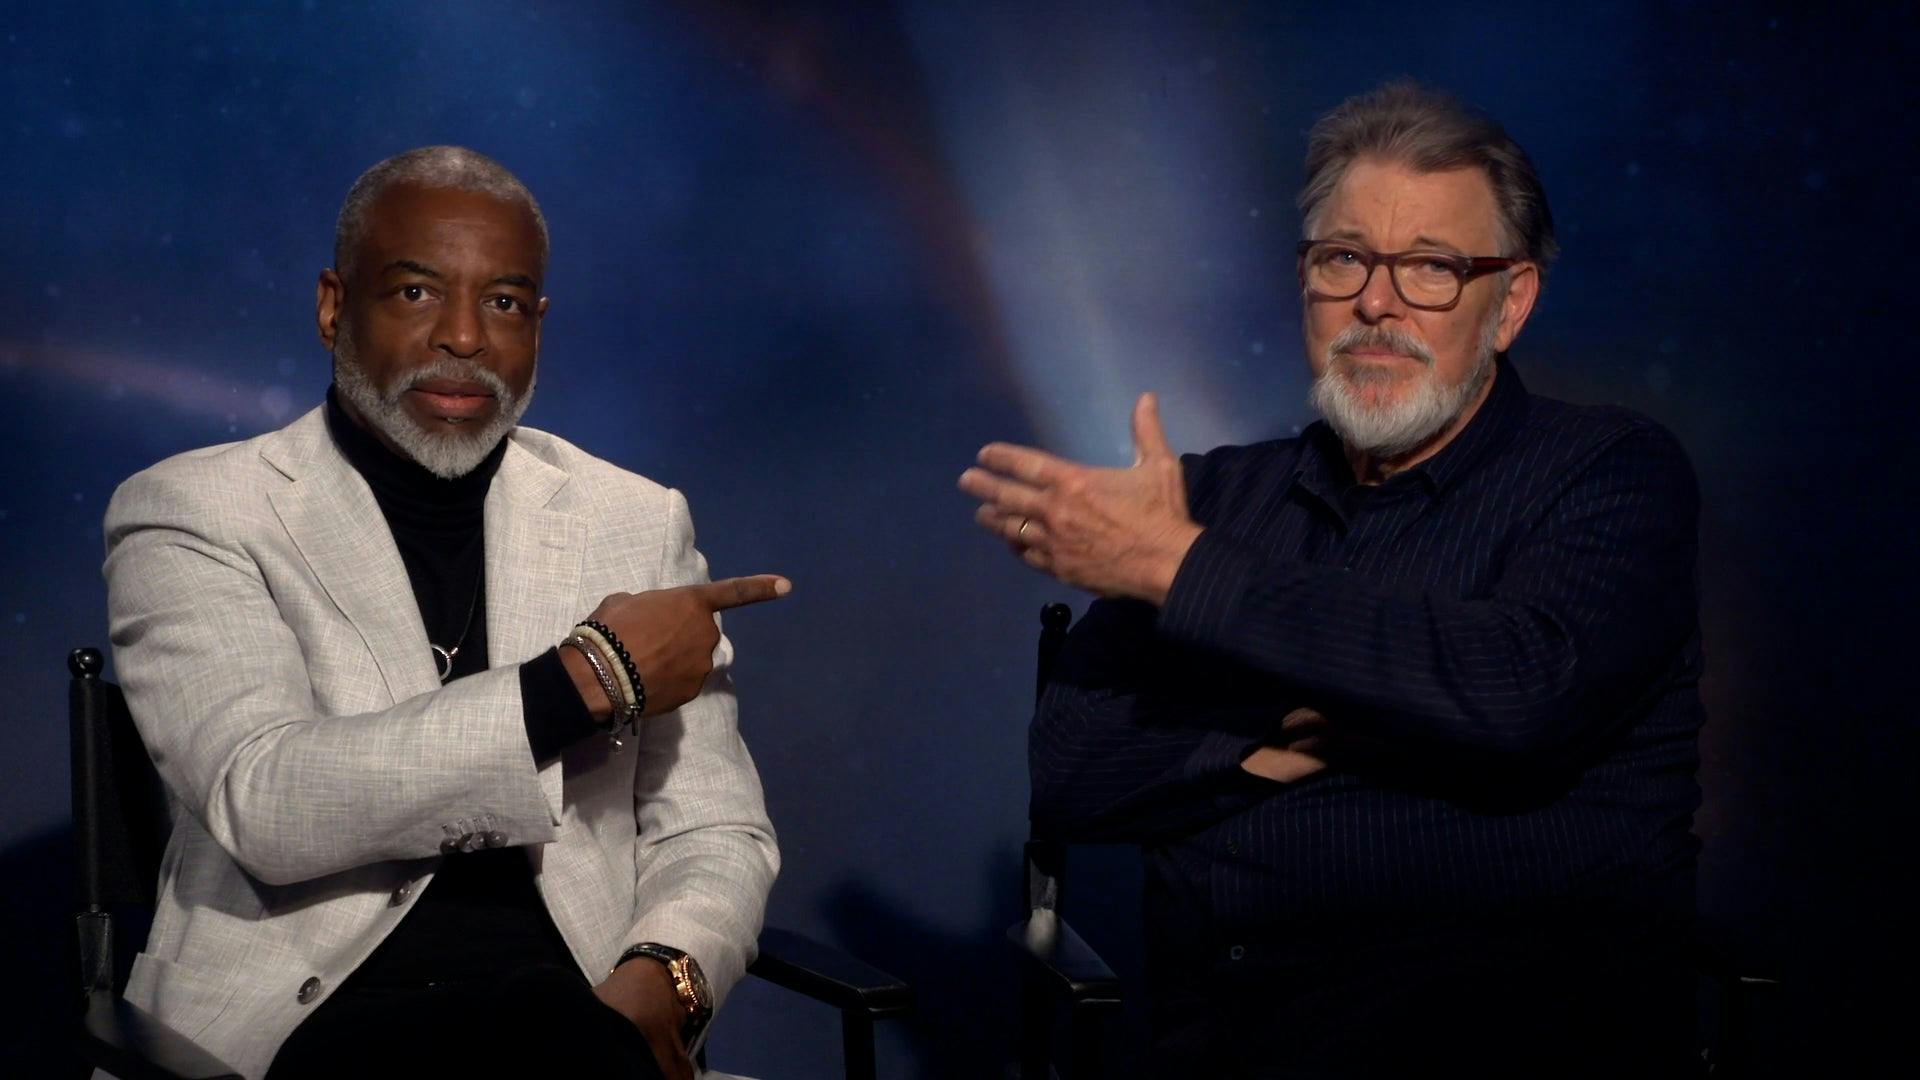 LeVar Burton points at Jonathan Frakes who holds his hand in LeVar's direction